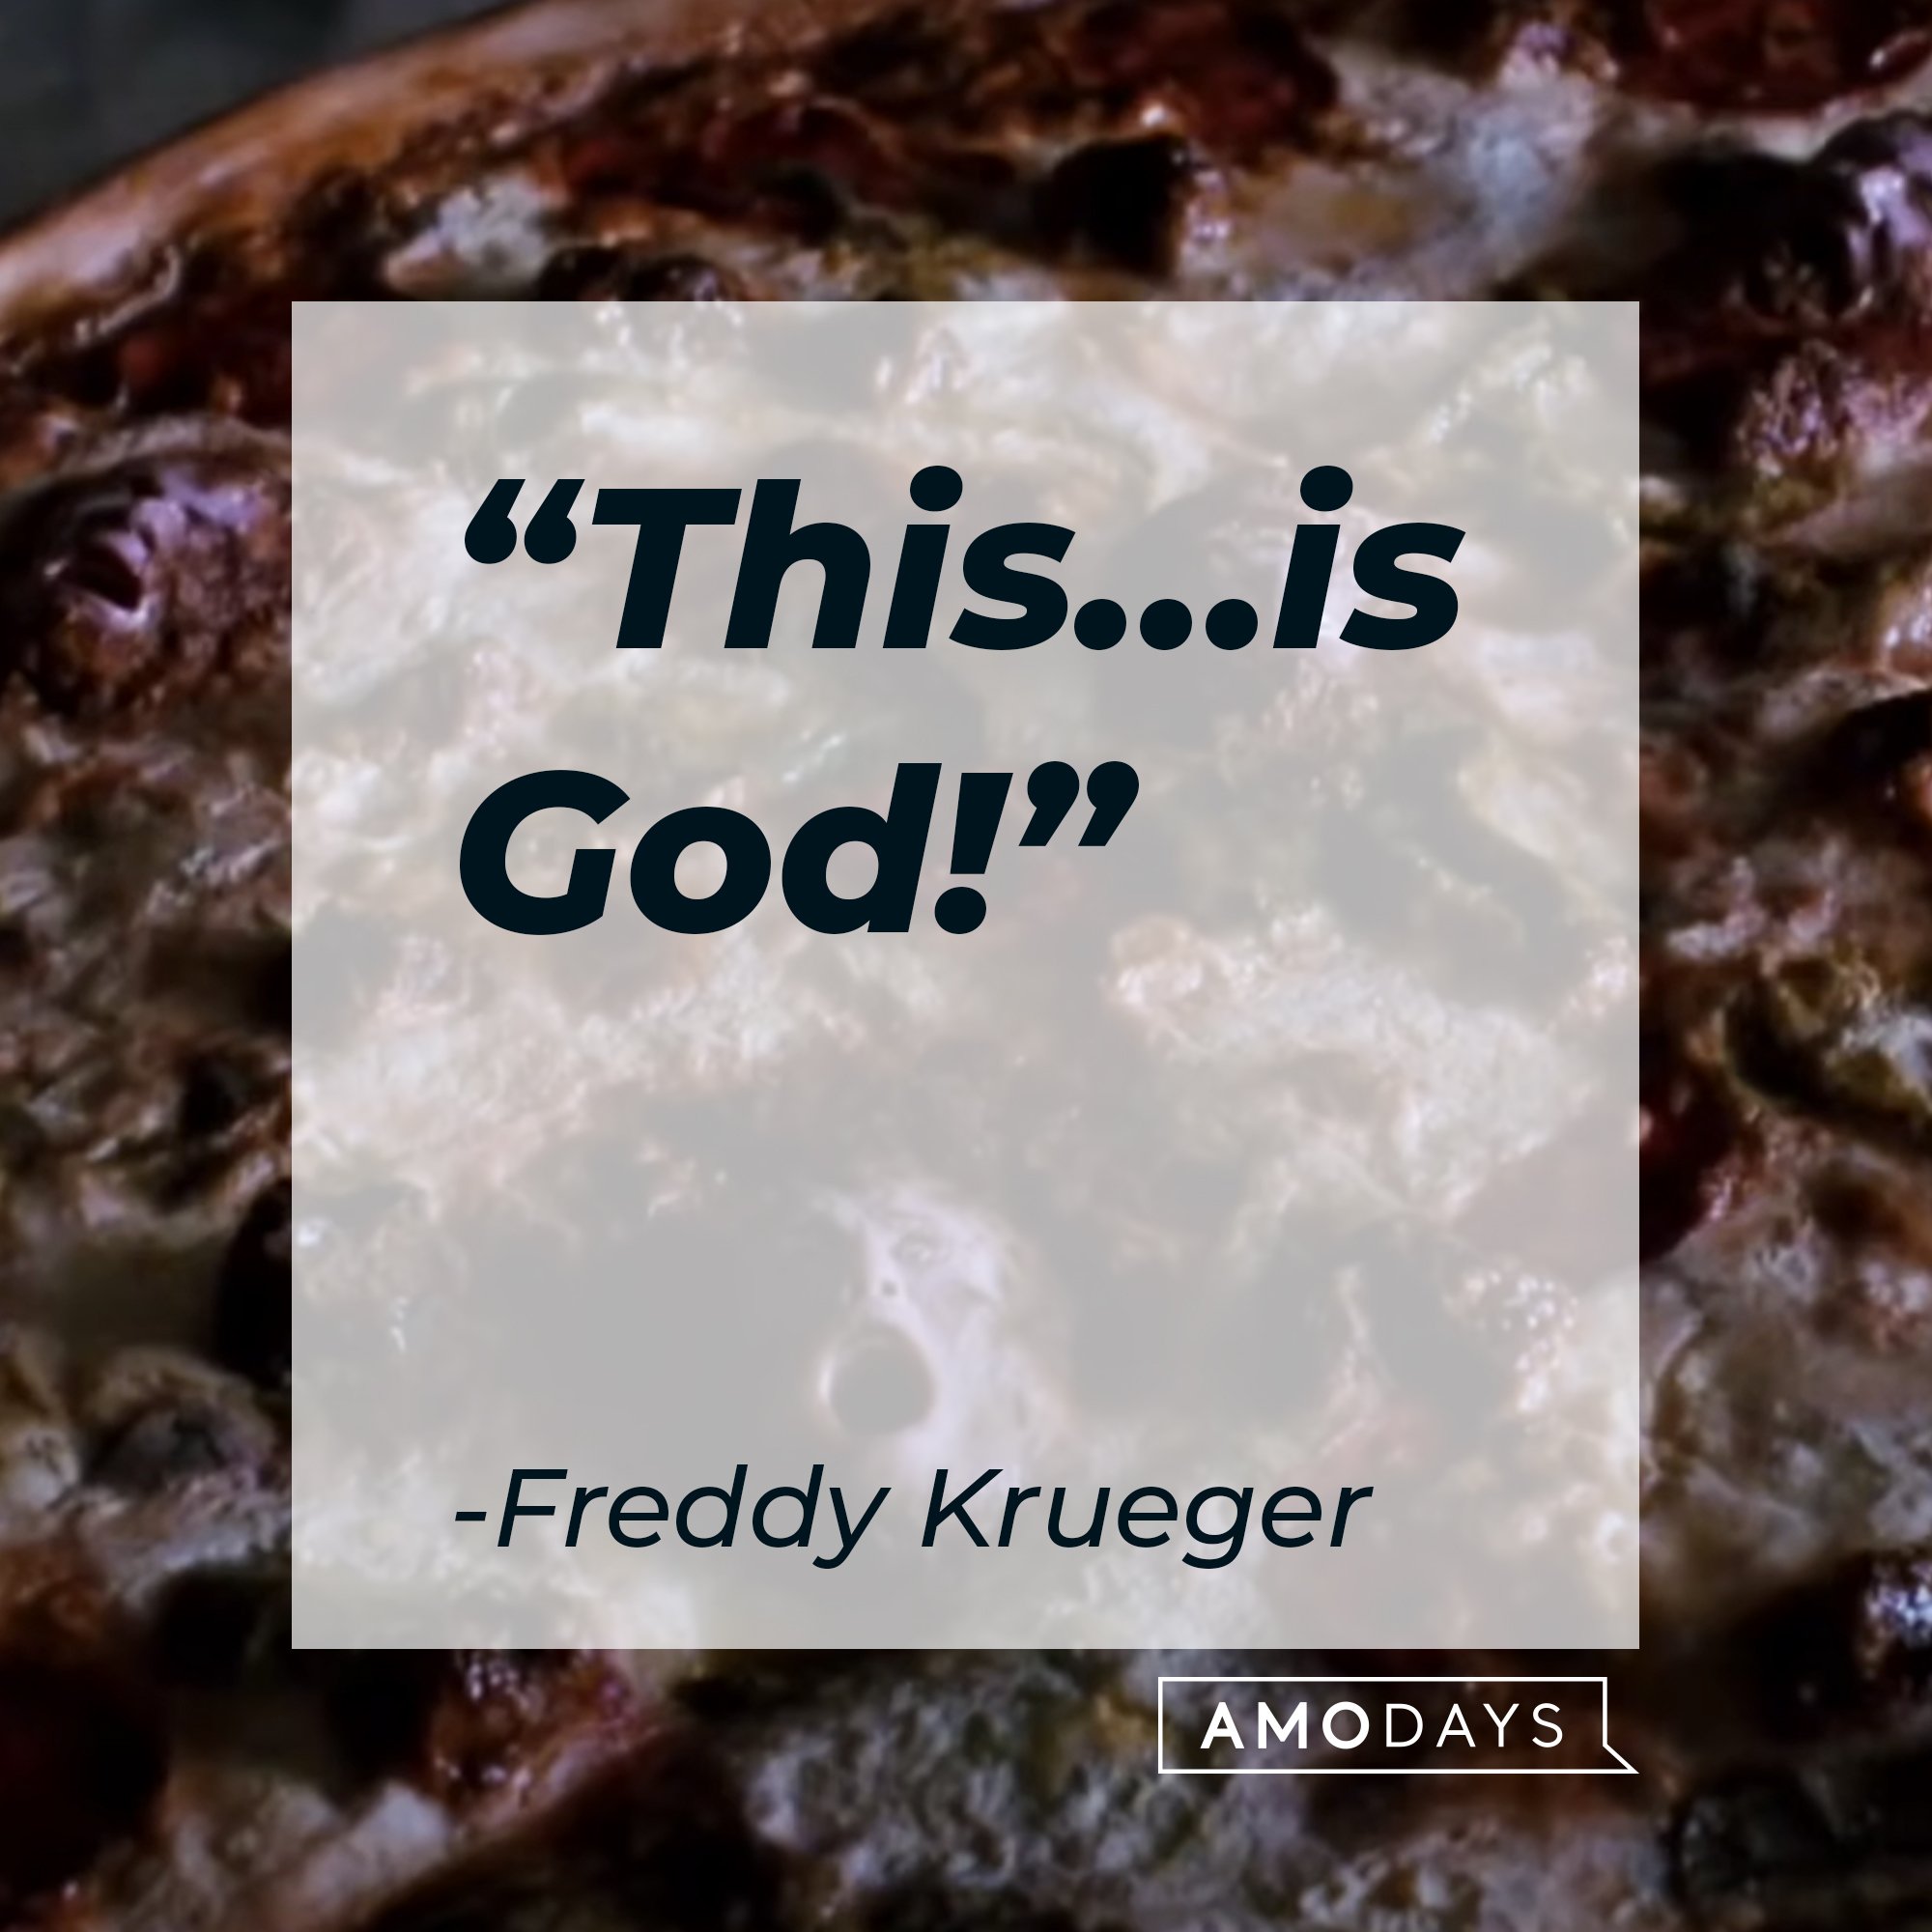  Freddy Krueger’s quote: "This…is God!" | Image: AmoDays